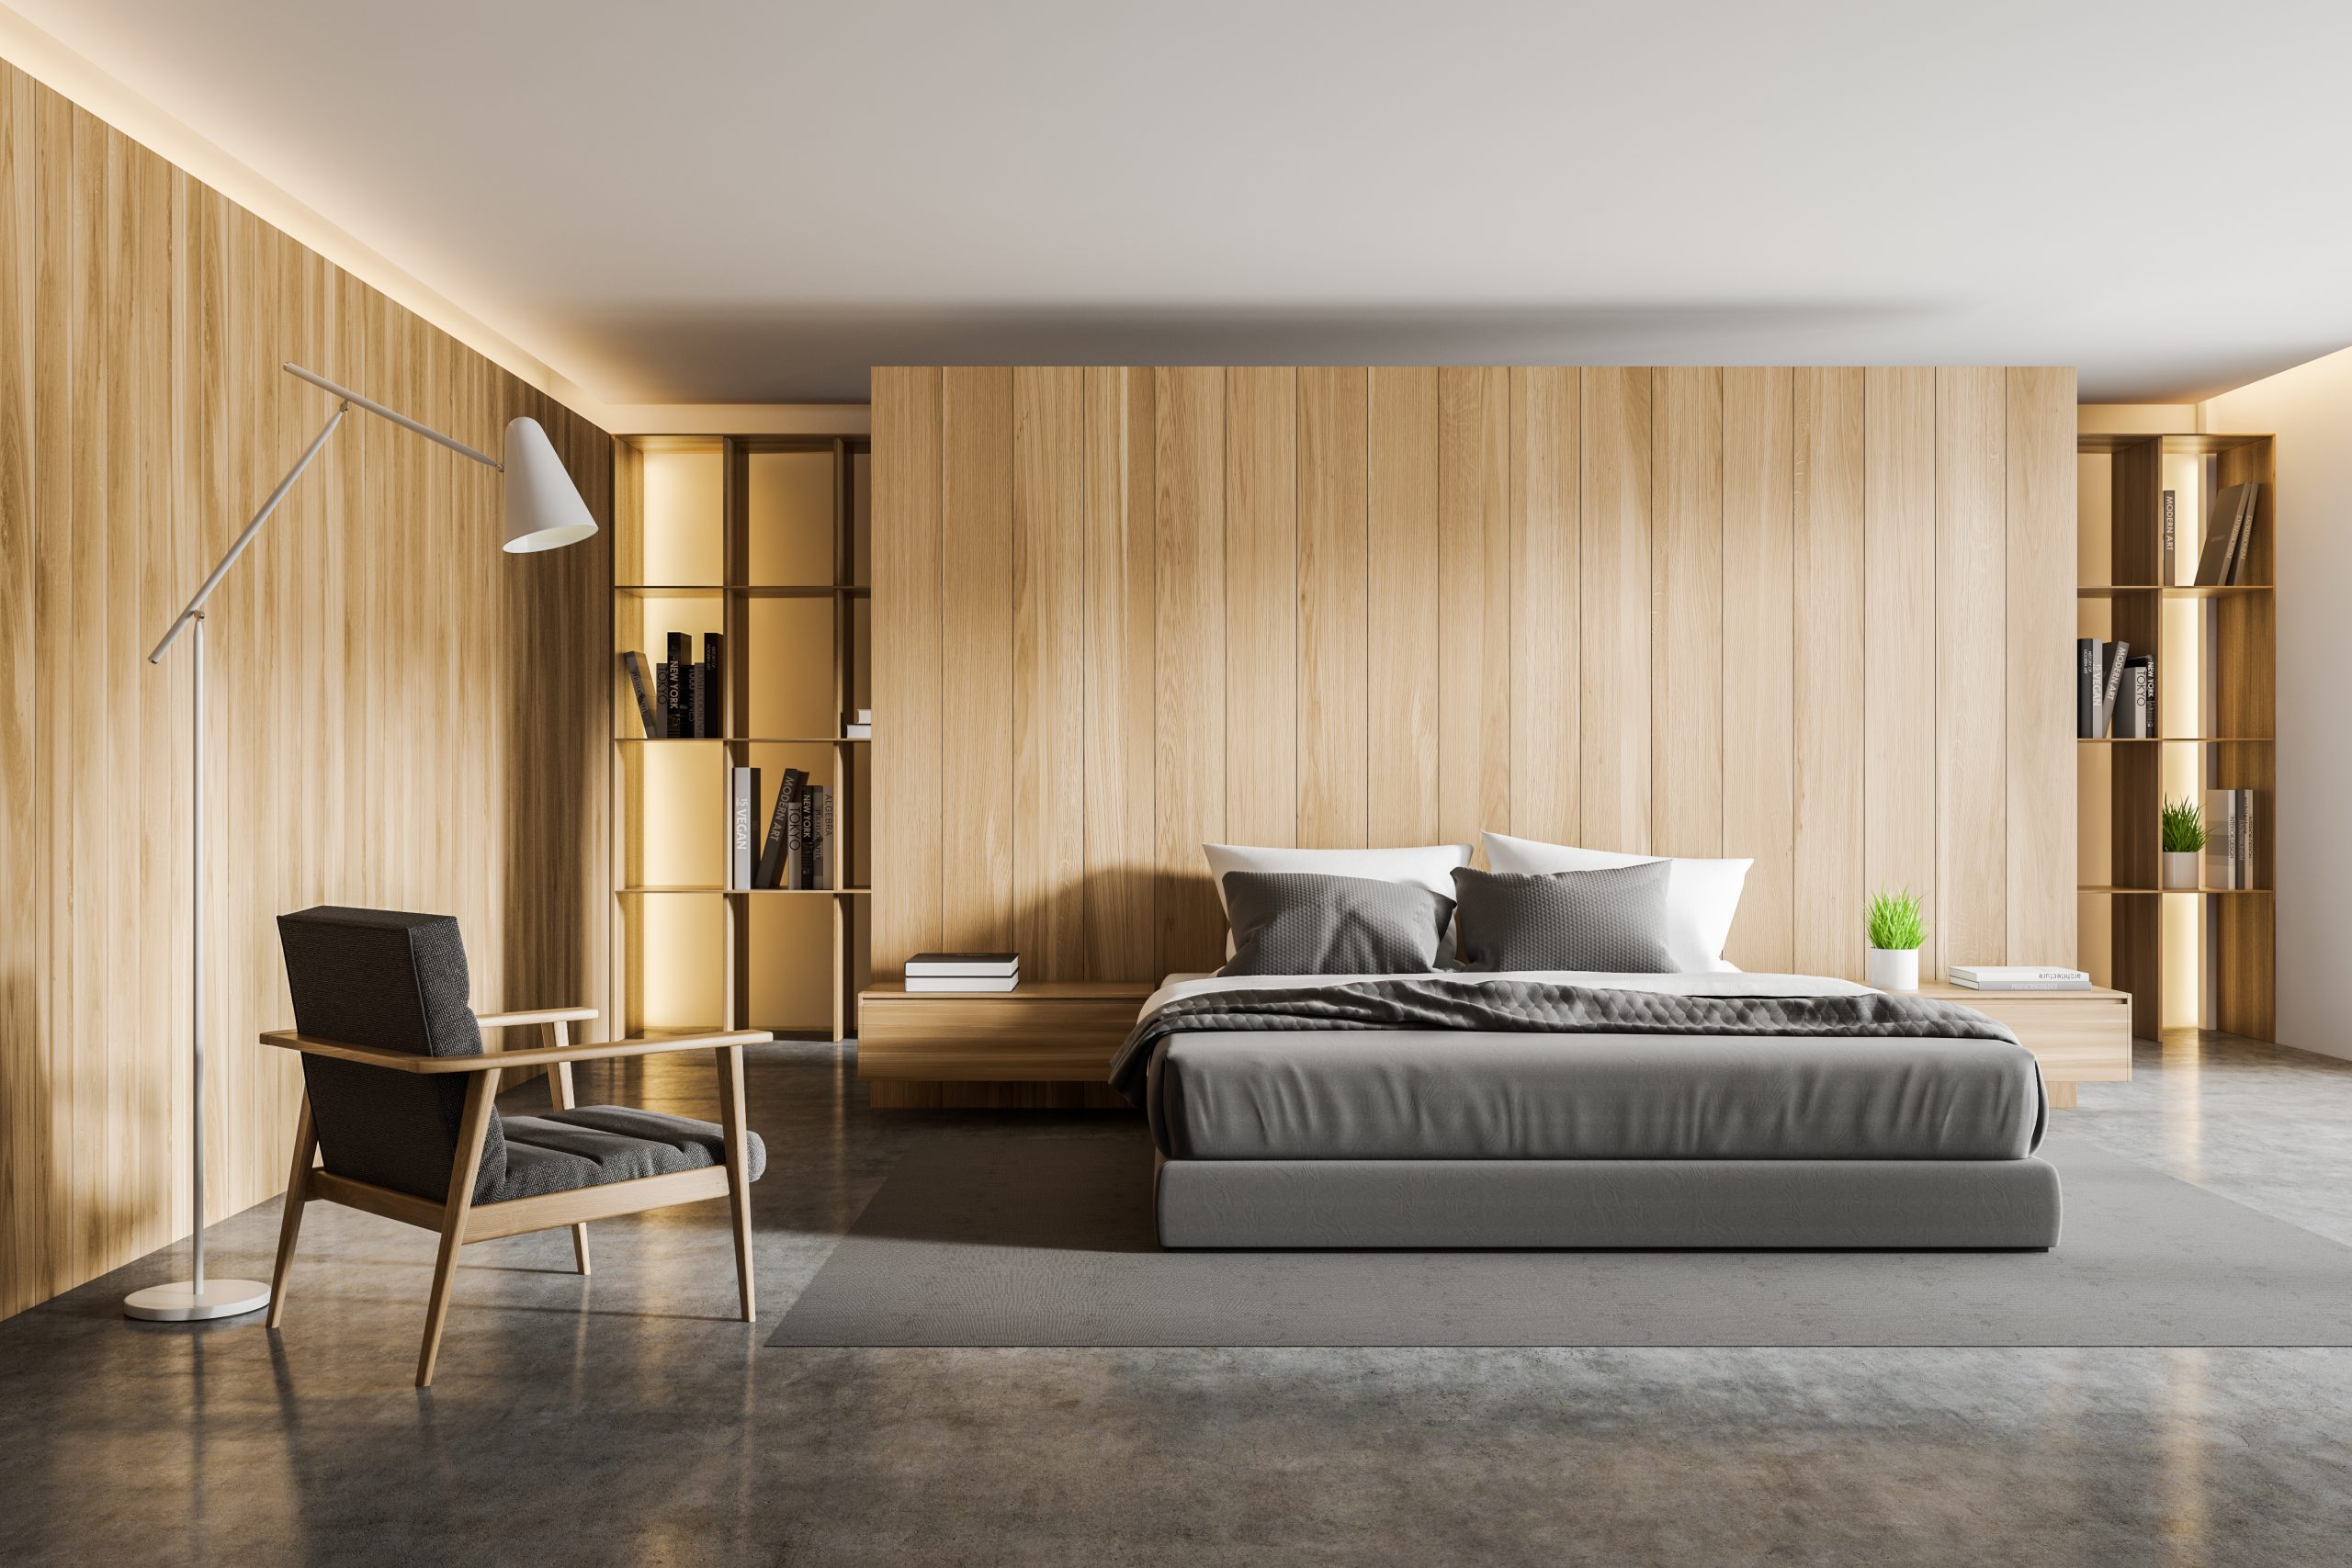 Interior of comfortable master bedroom with wooden walls, concrete floor, king size bed standing on carpet, bookshelves and gray armchair. 3d rendering